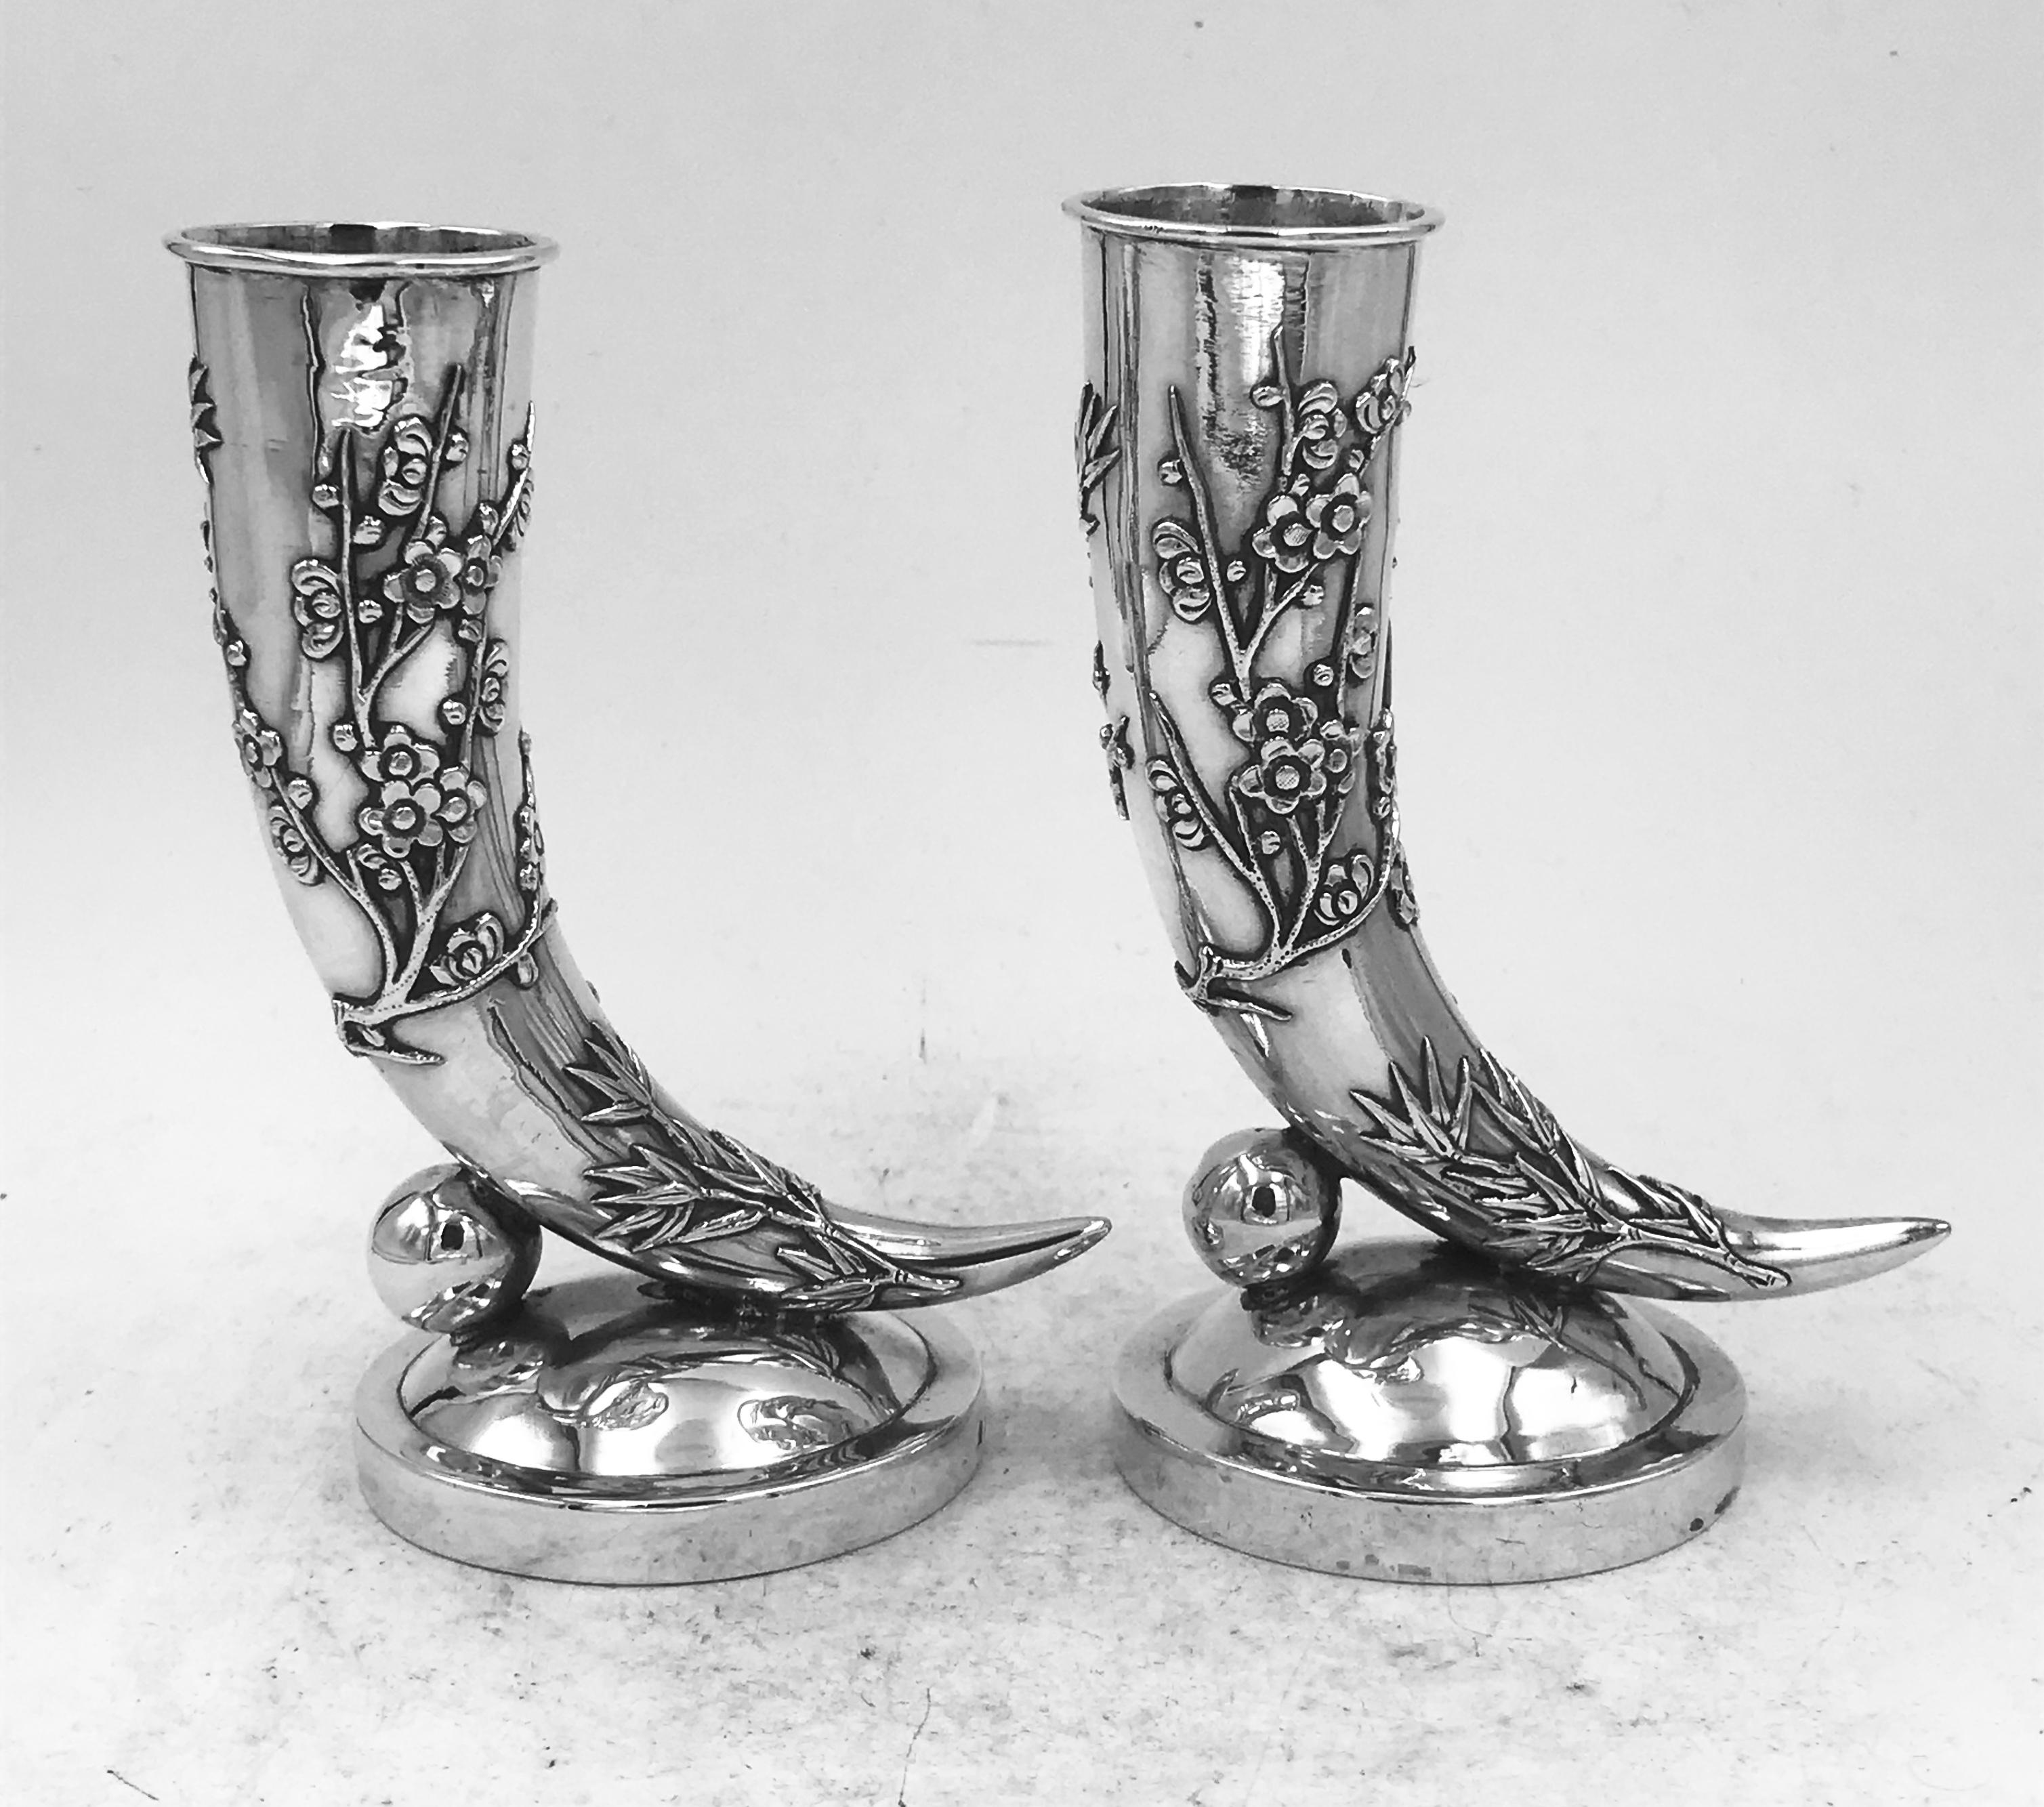 Two Chinese silver vases of cornucopia form, both decorated with applied bamboo and chrysanthemum and on a circular base. The vases are similar yet were made by different silversmith's and sold by different retailer's. One marked WH was retailed by